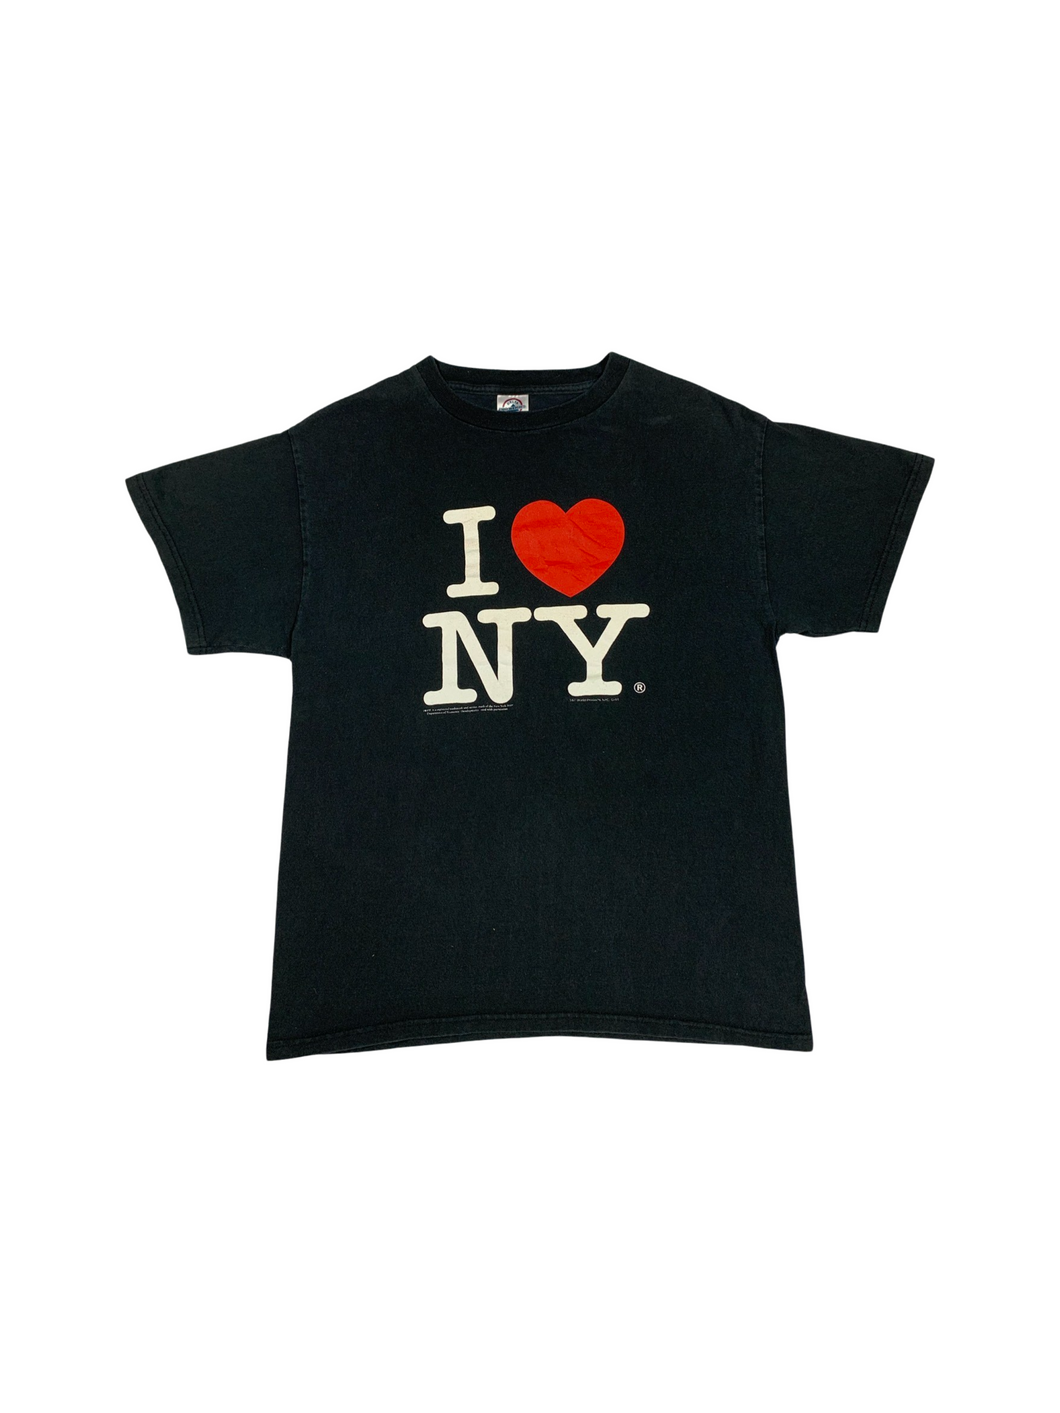 VINTAGE NEW YORK T SHIRT SIZE SMALL